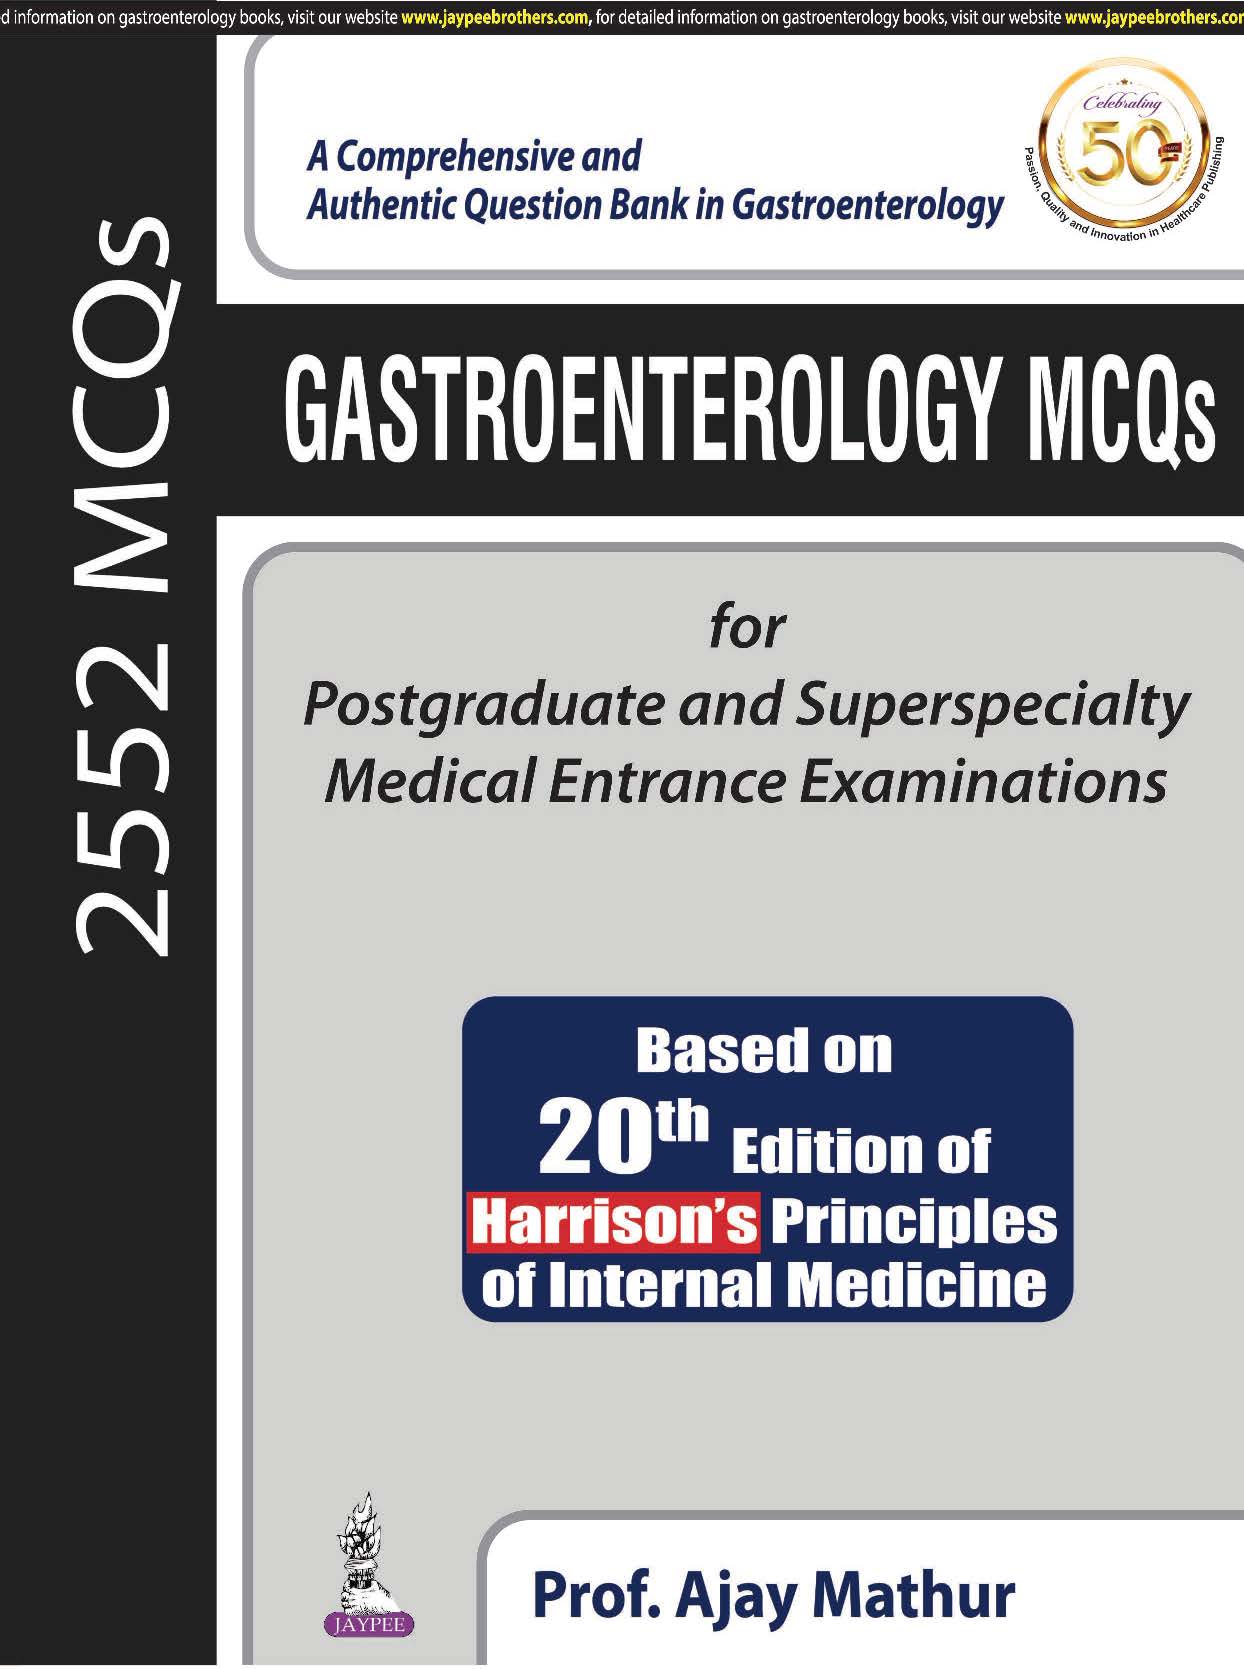 Gastroenterology Mcqs For Postgraduate And Superspecialty Medical Entrance Examinations (Based On 20Th Edition Of Harrison Principles Of Internal Medicine)